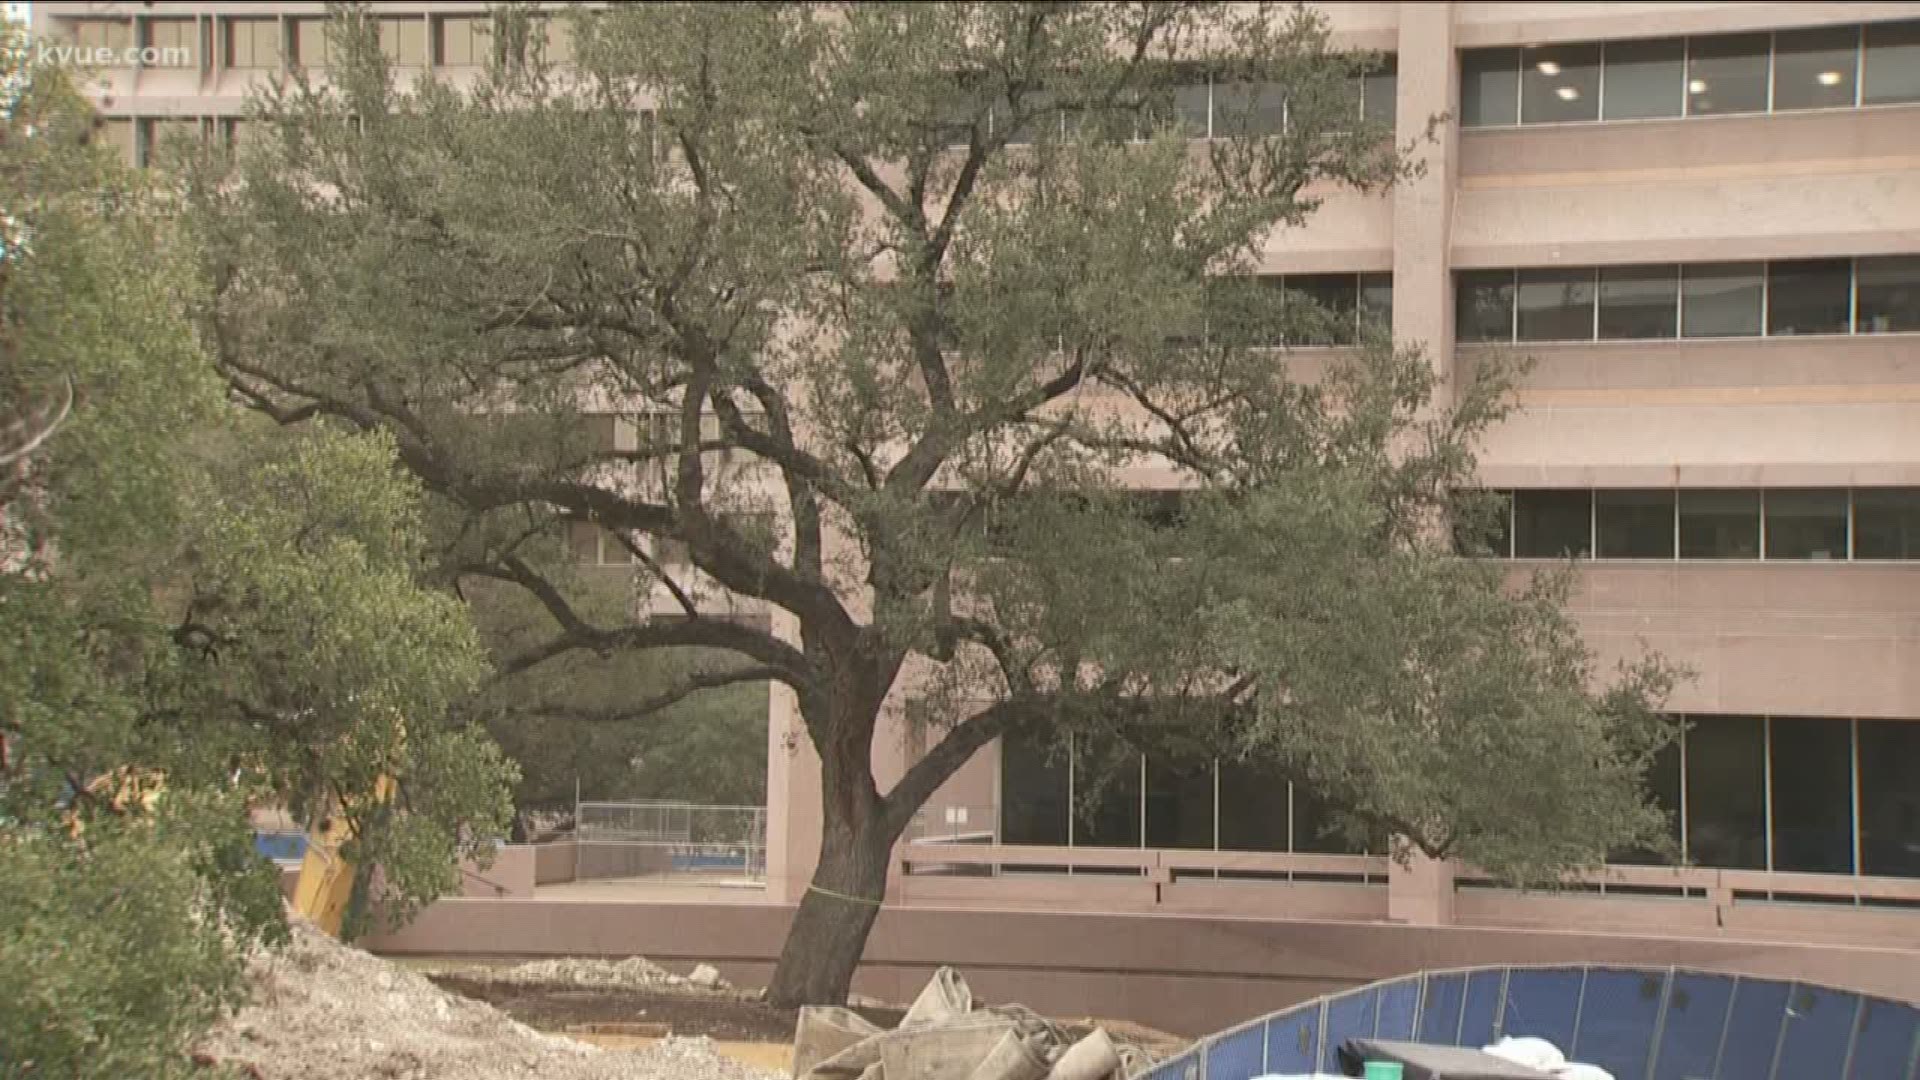 Austin crews will be taking down some street signs and even traffic signals on Sunday to move a massive live oak tree out of a construction zone.